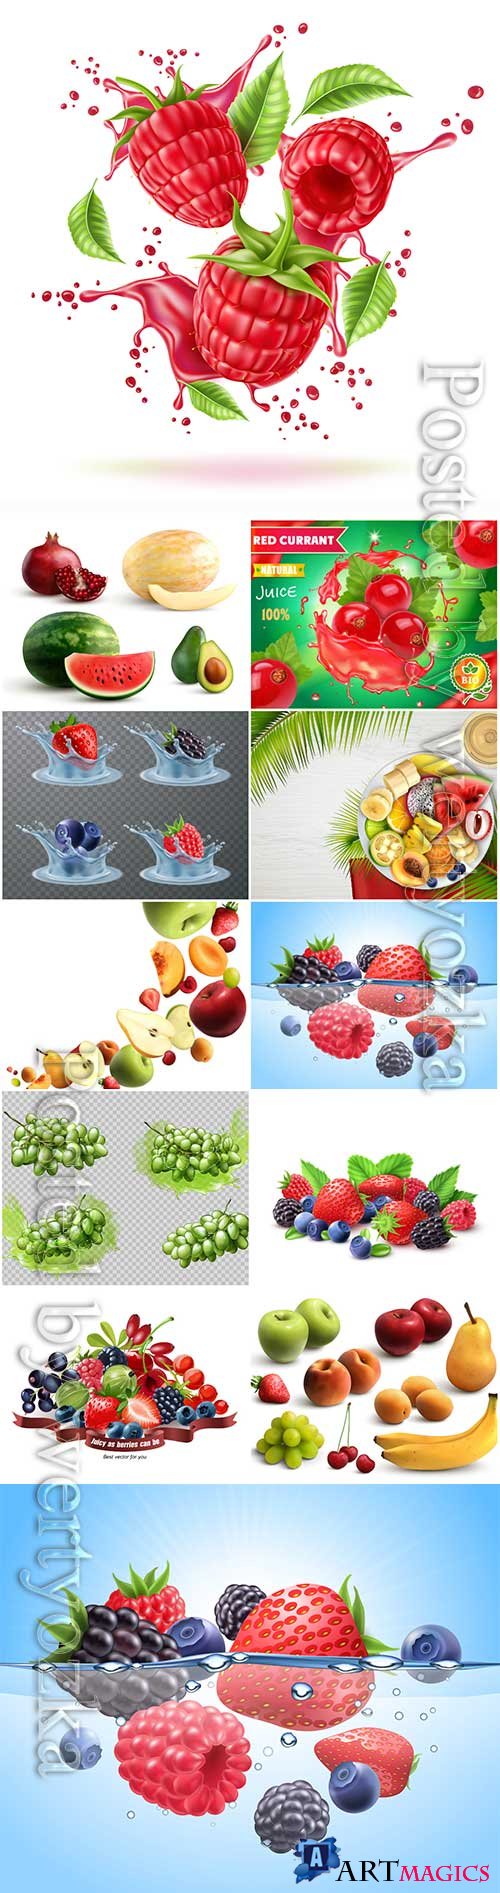 Mix of fresh berries and fruits isolated on white background